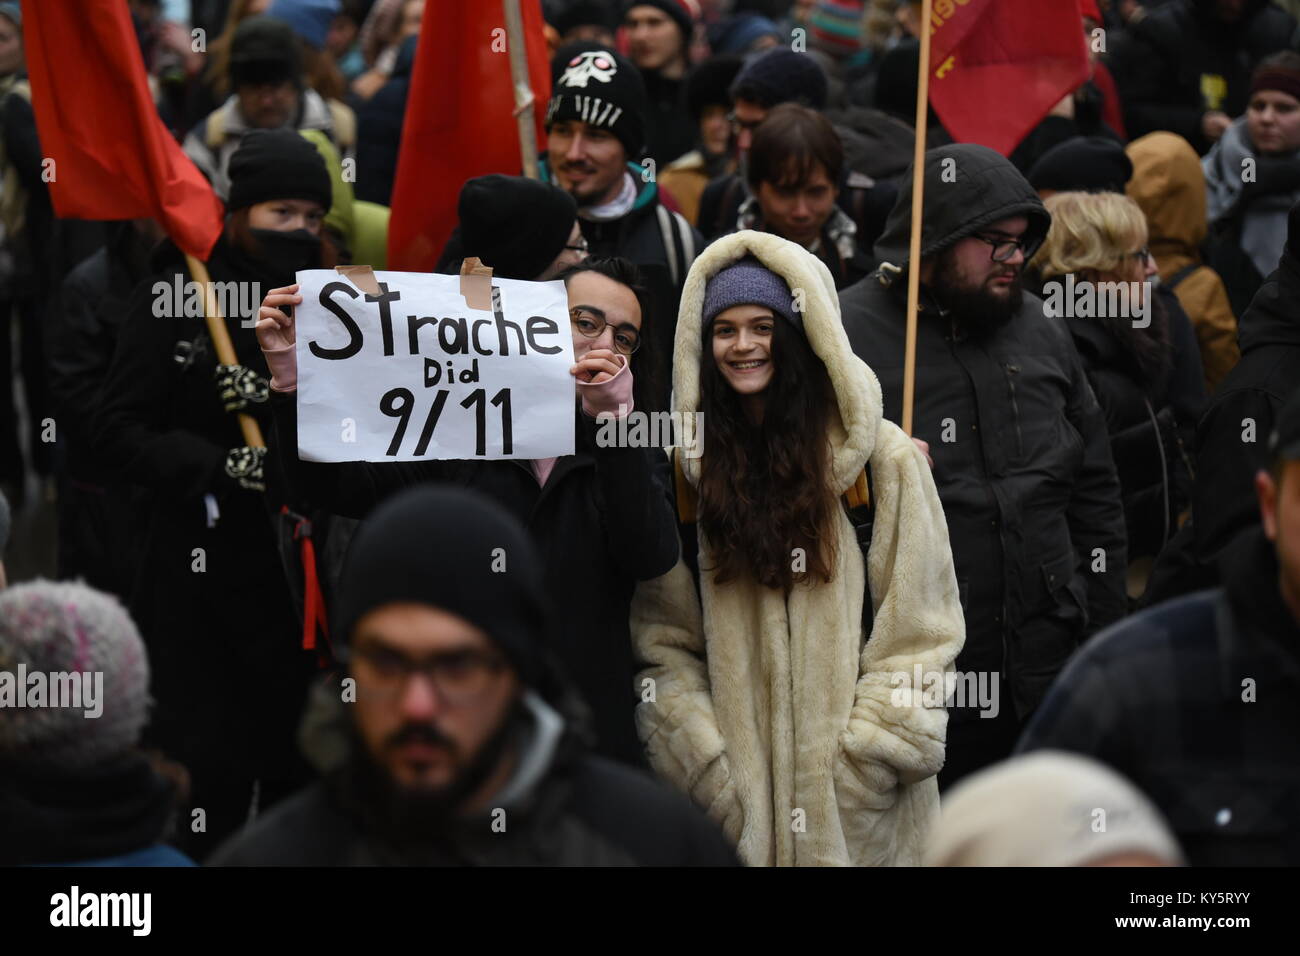 Vienna, Austria. 13th Jan, 2018. protester holding a sign critical of Austria's vice-chancellor Heinz-Christian Strache. Credit: Vincent Sufiyan/Alamy Live News Stock Photo